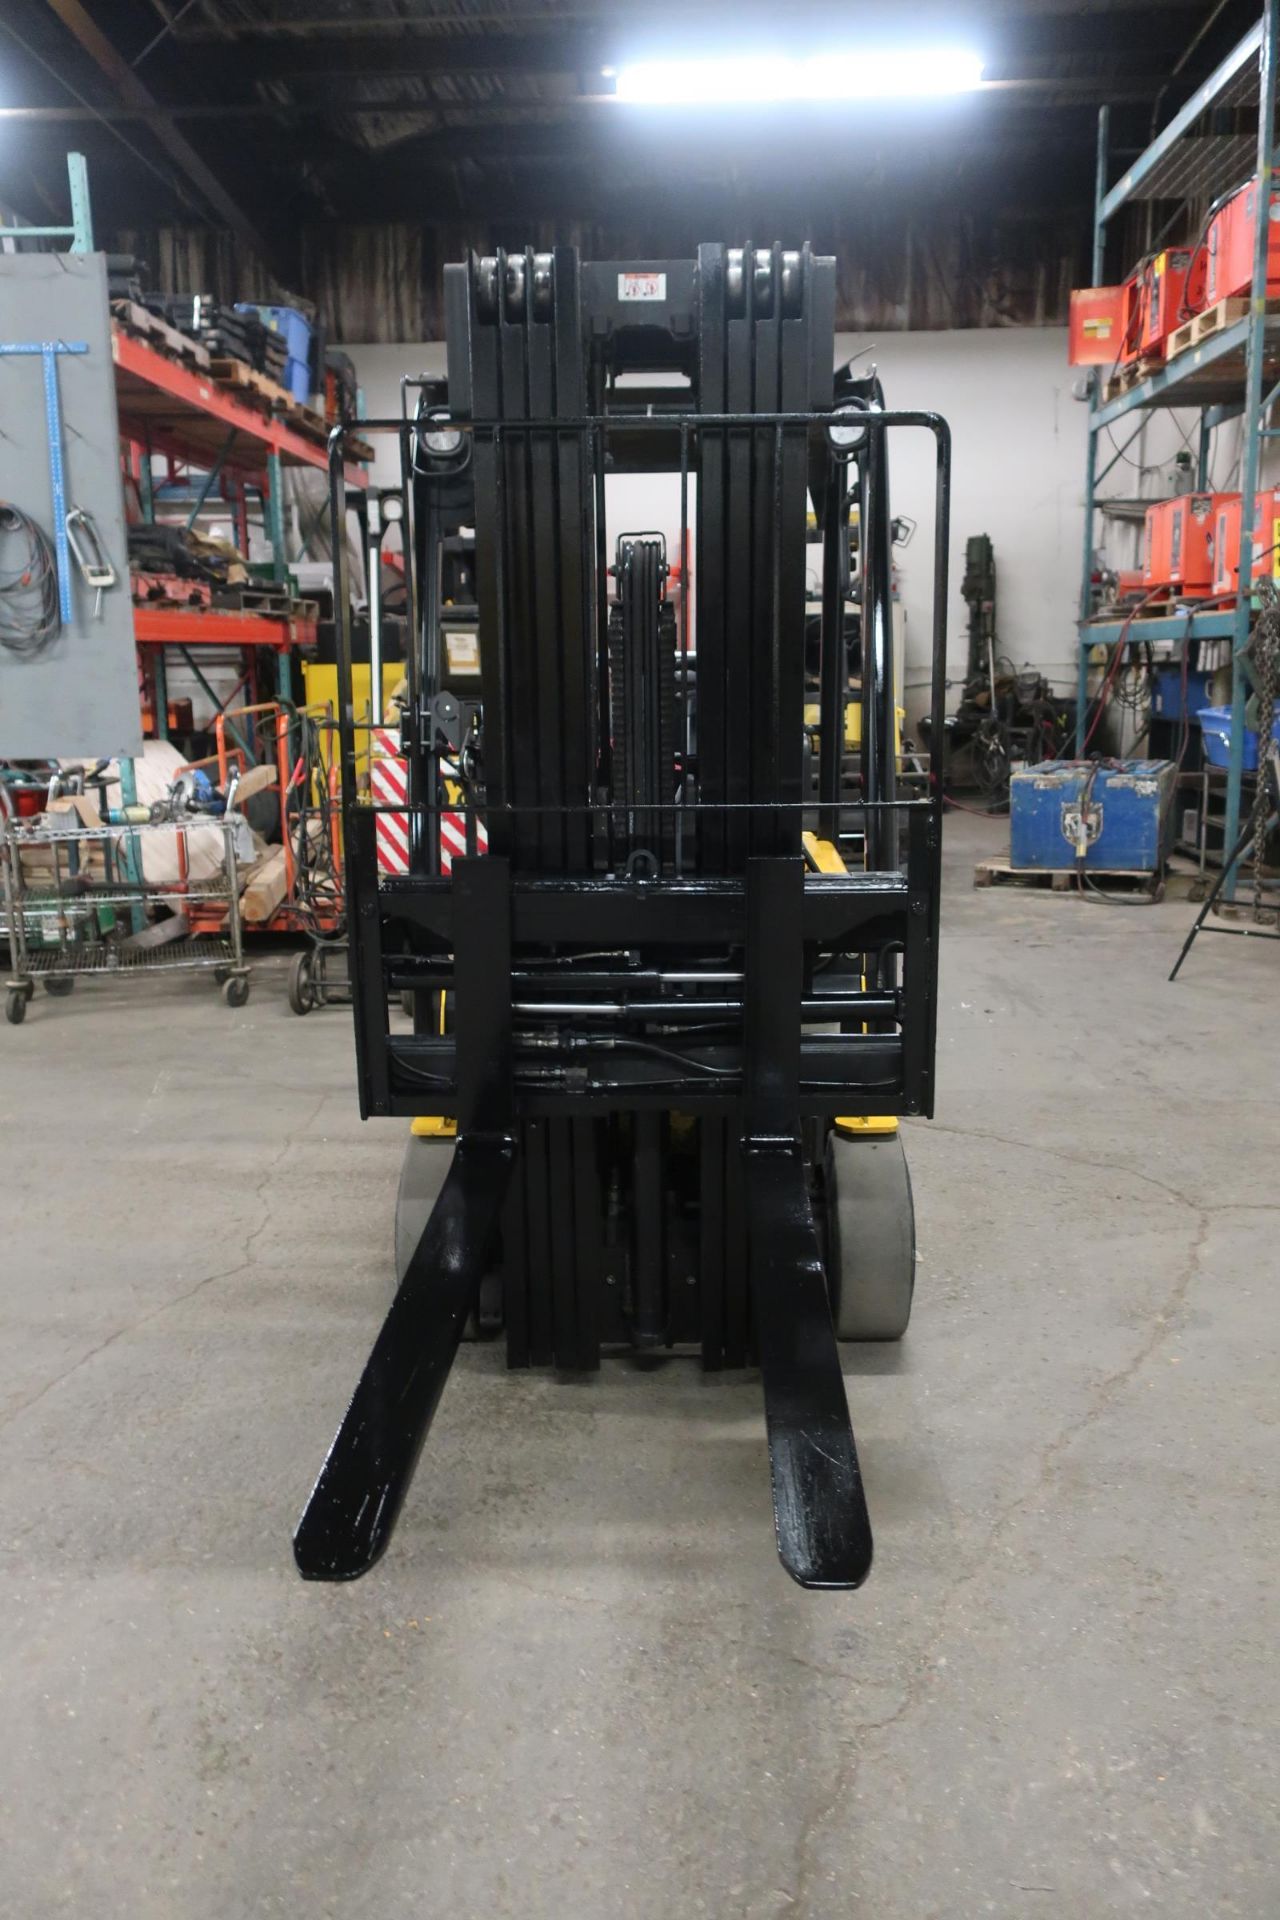 FREE CUSTOMS - 2014 Yale 3500lbs Forklift 3-Wheel unit with 4-stage Mast and Sideshift & Fork - Image 2 of 3